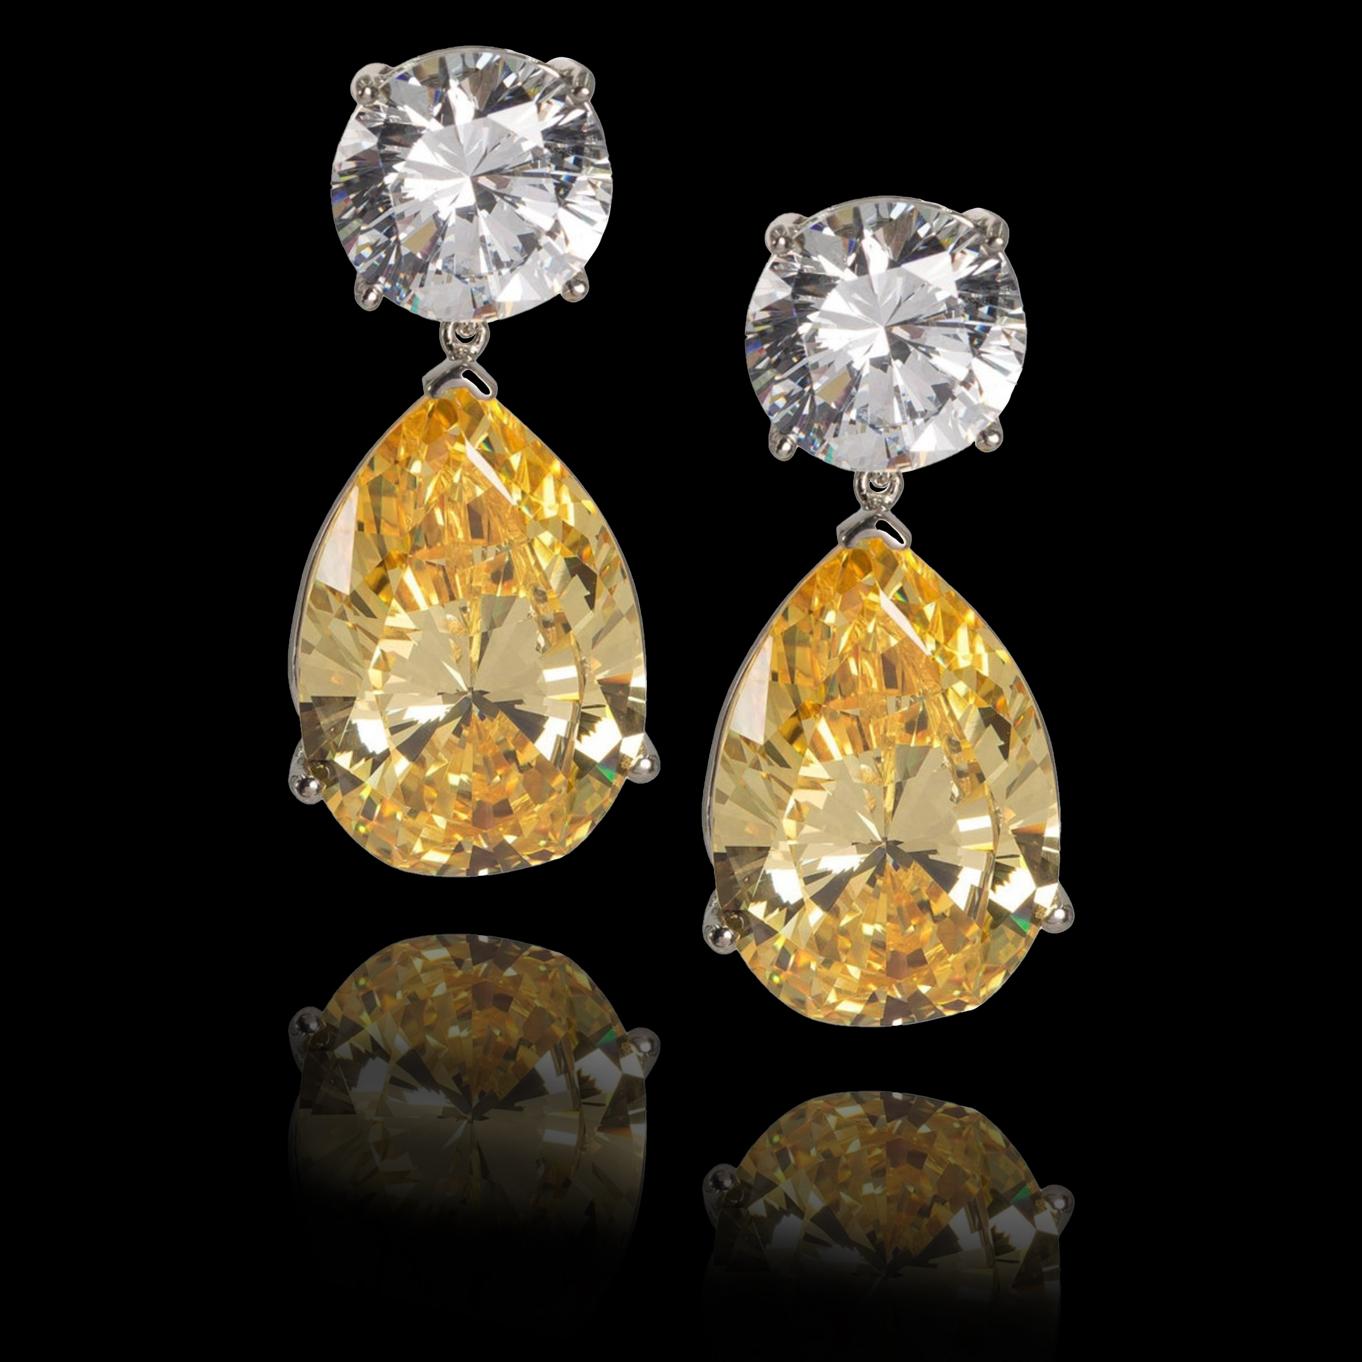 Created Diamond Look Large  White and Yellow Drop CZ Earrings
If you want Intense Fancy Yellow then these stunning 'diamond' earrings will astonish and impress.
Each round CZ has the equivalent look of a full brilliant cut 10-carat white diamond,